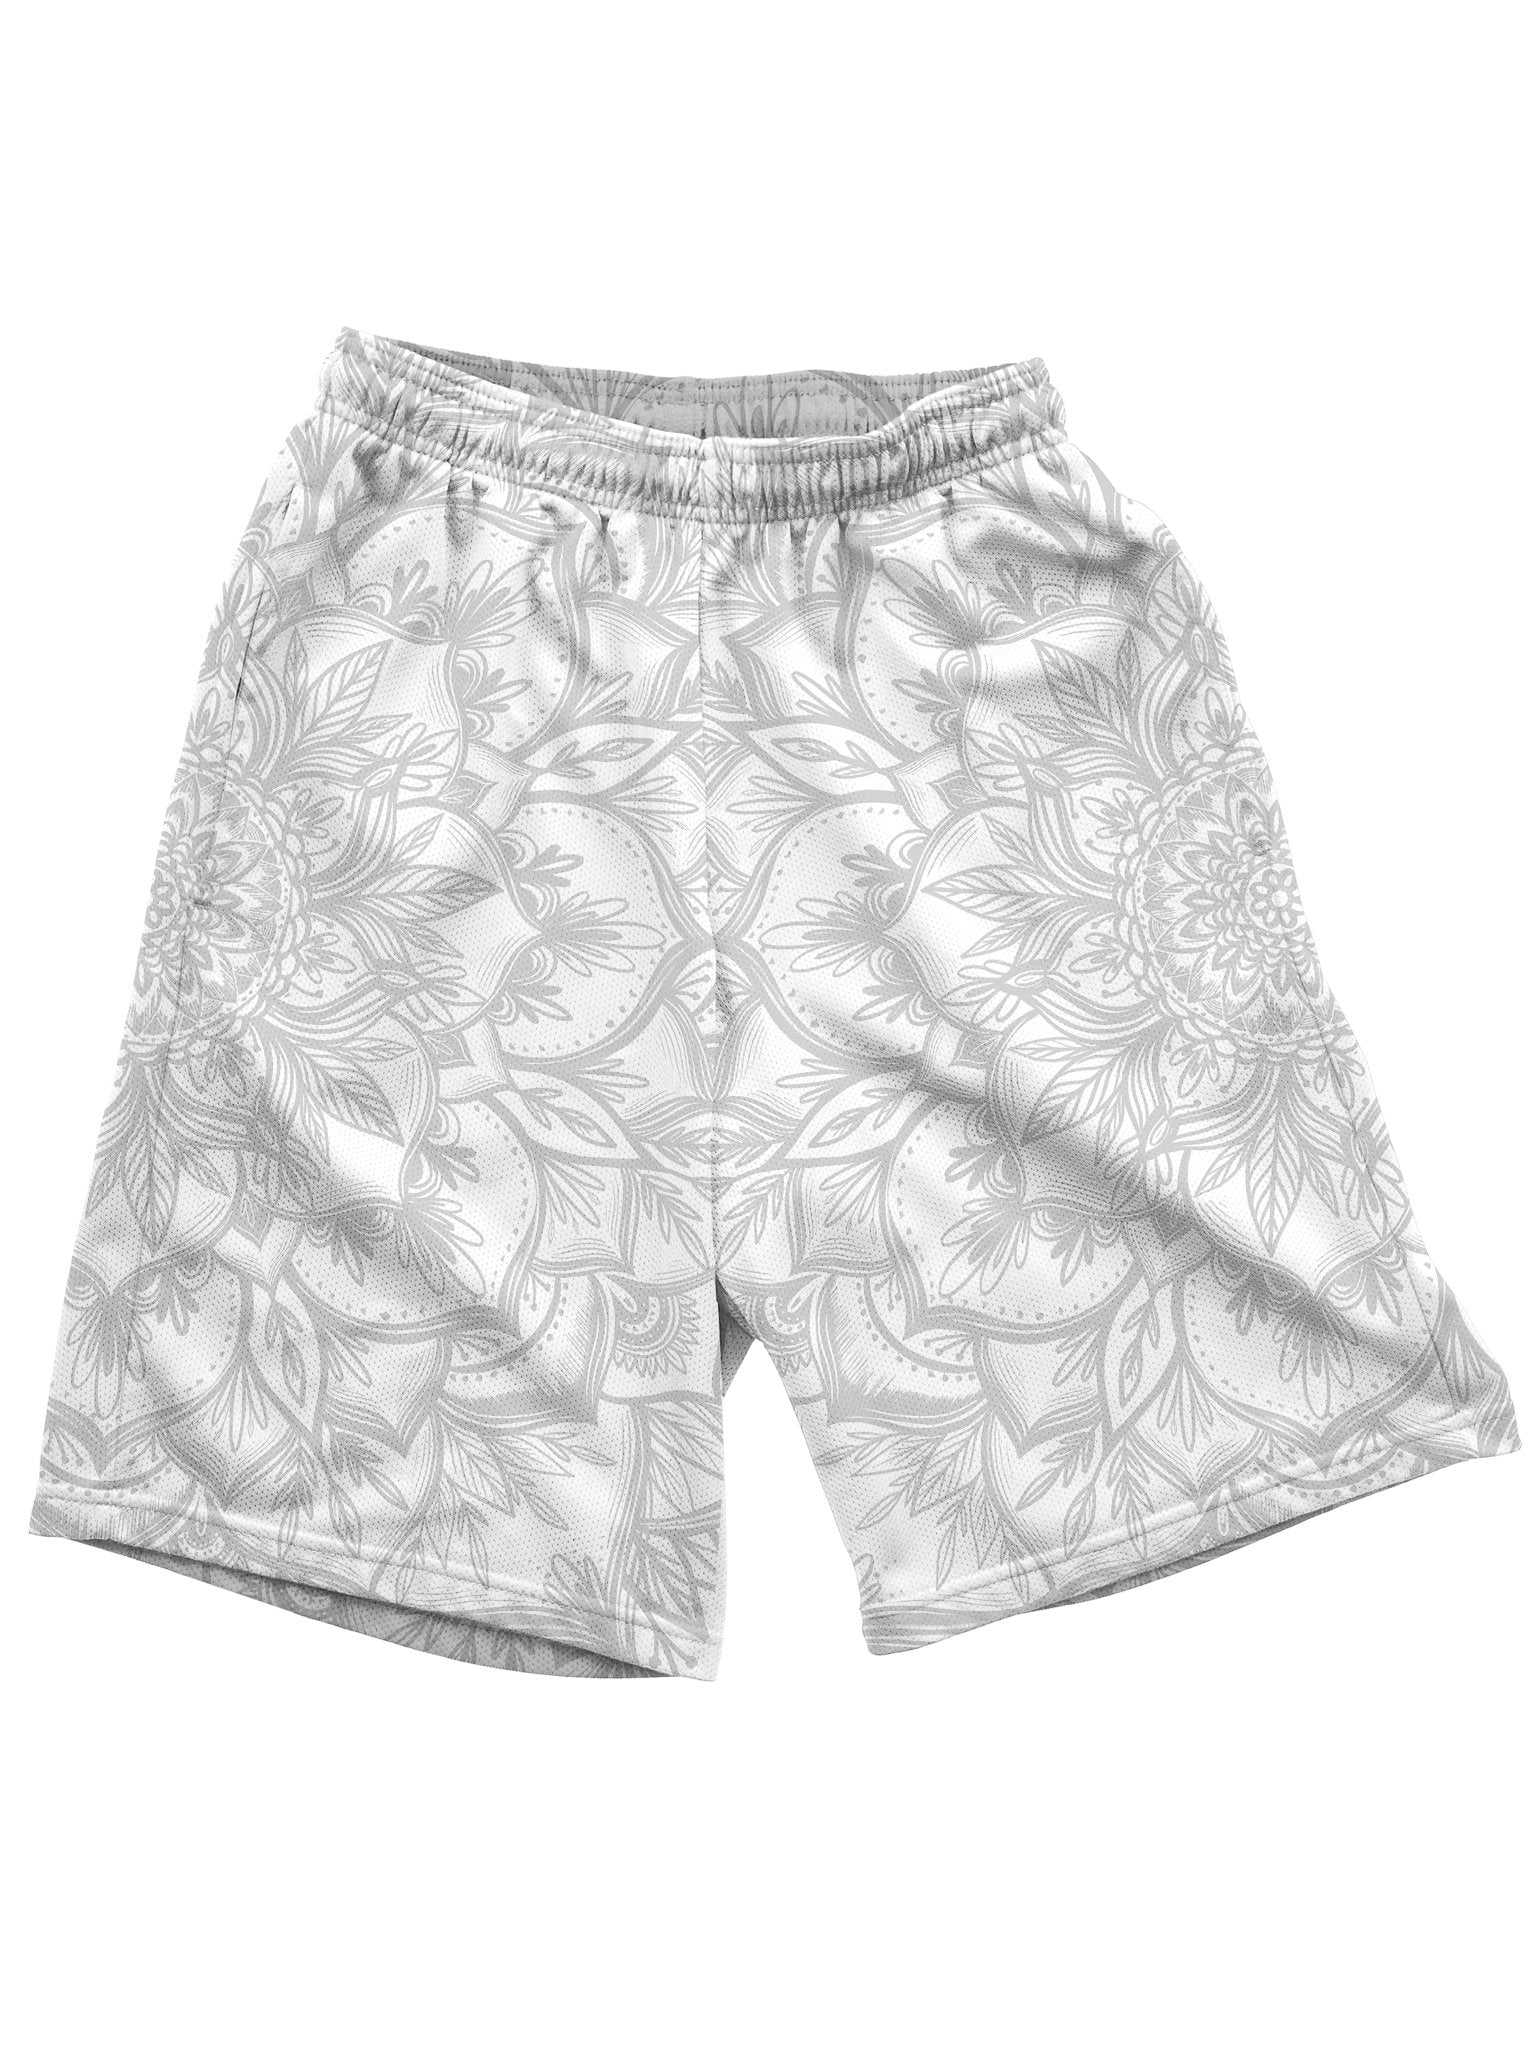 Mens Shorts: Perfect For Rave Festivals, Swimwear or the Gym - Electro ...